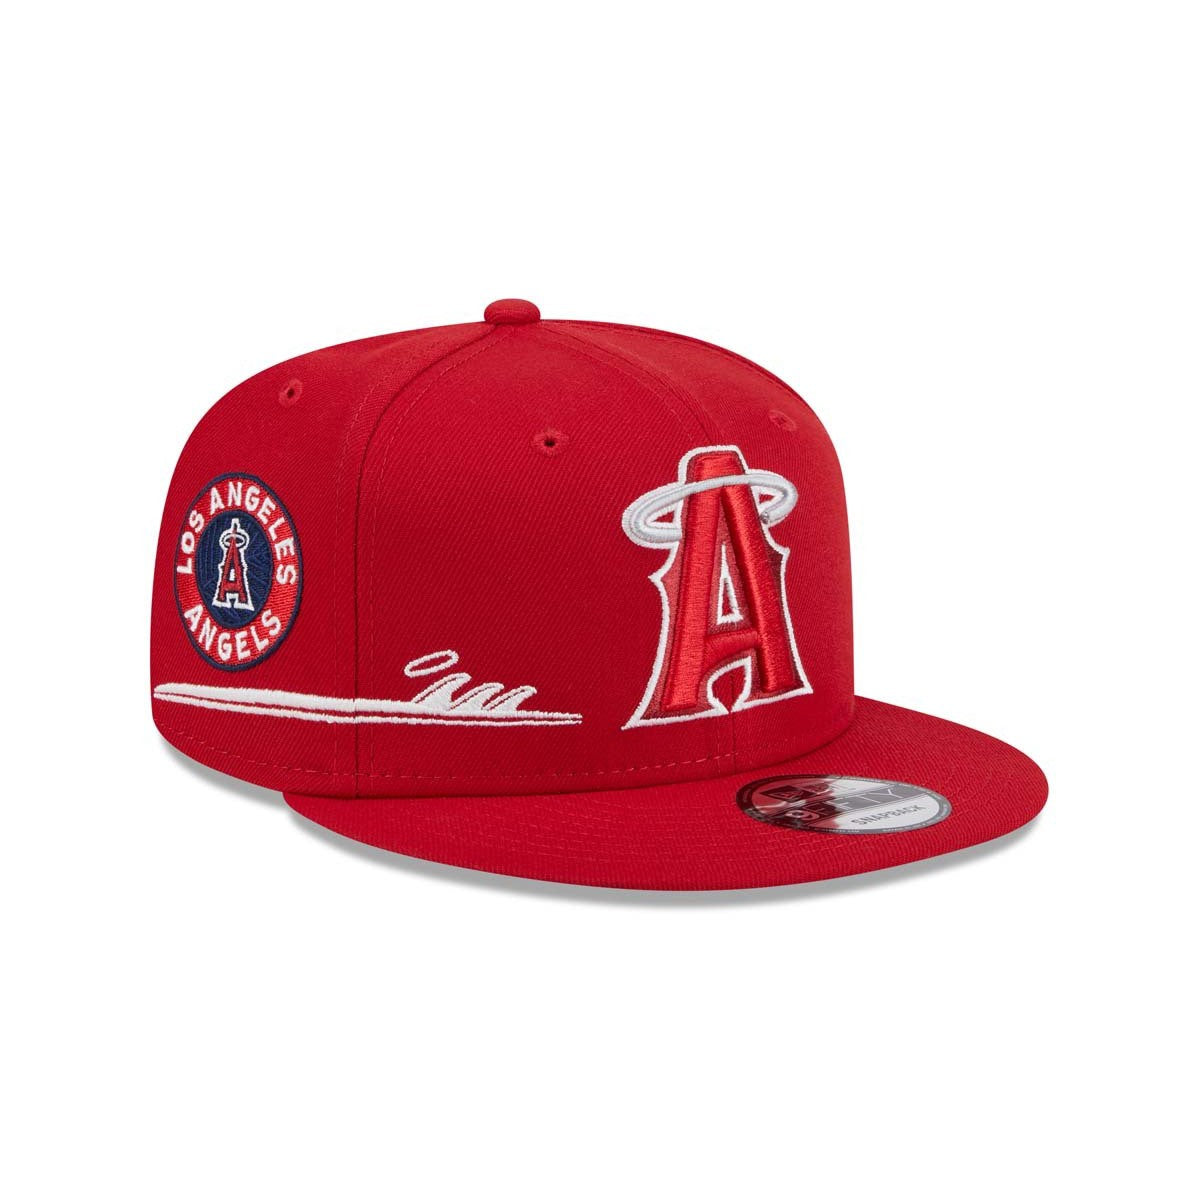 Los Angeles Angels City Connect Fan 9FIFTY Snapback Hat